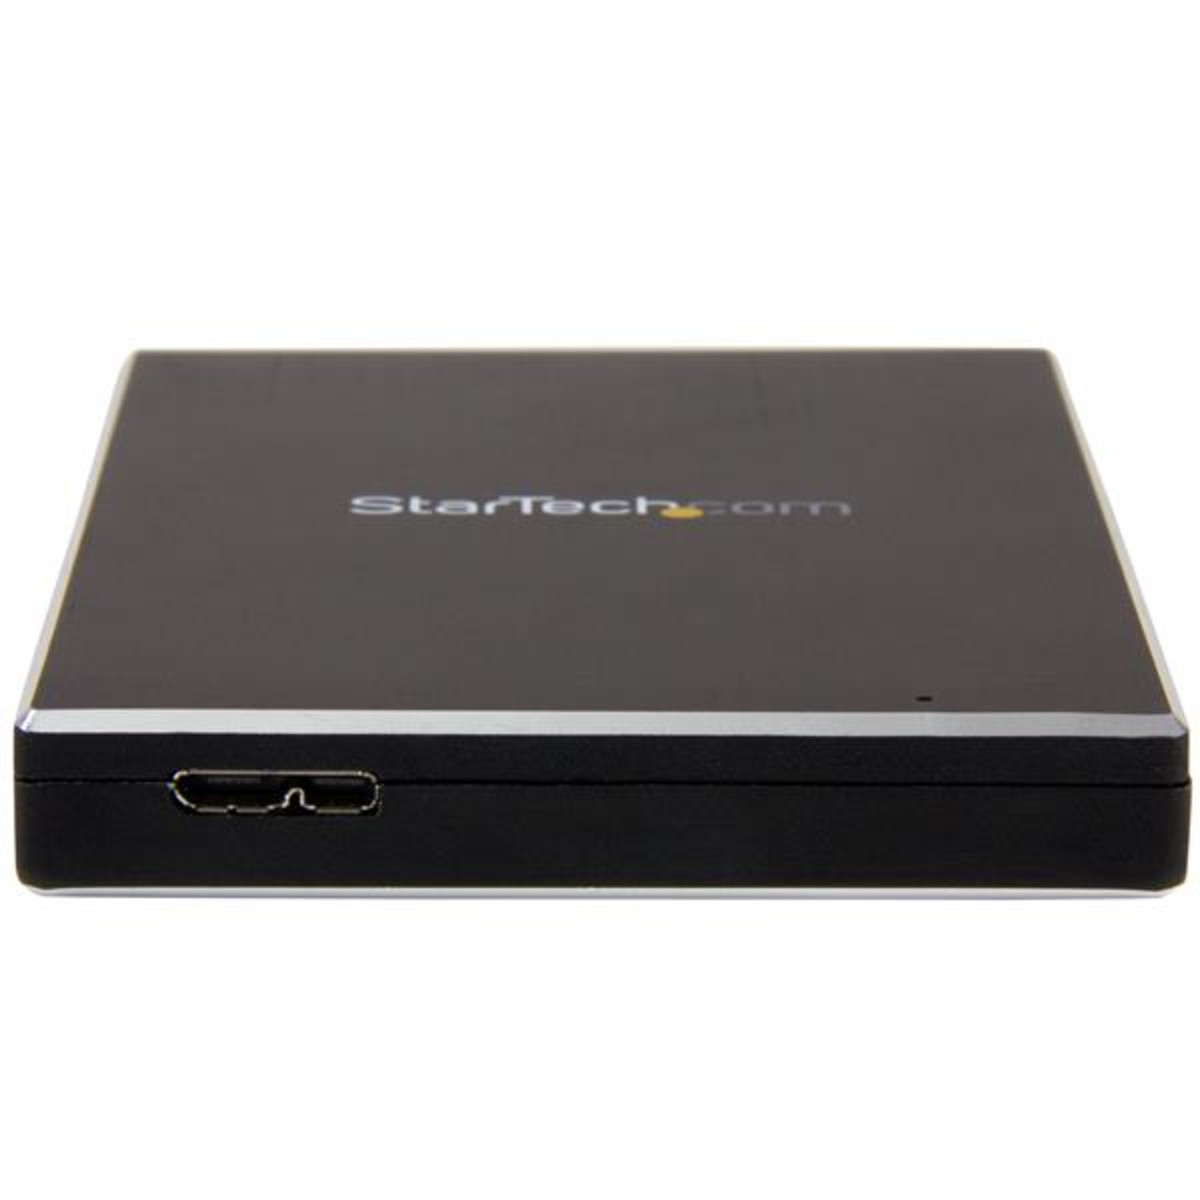 USB 3.1 Gen 2 (10 Gbps) enclosure for 2.